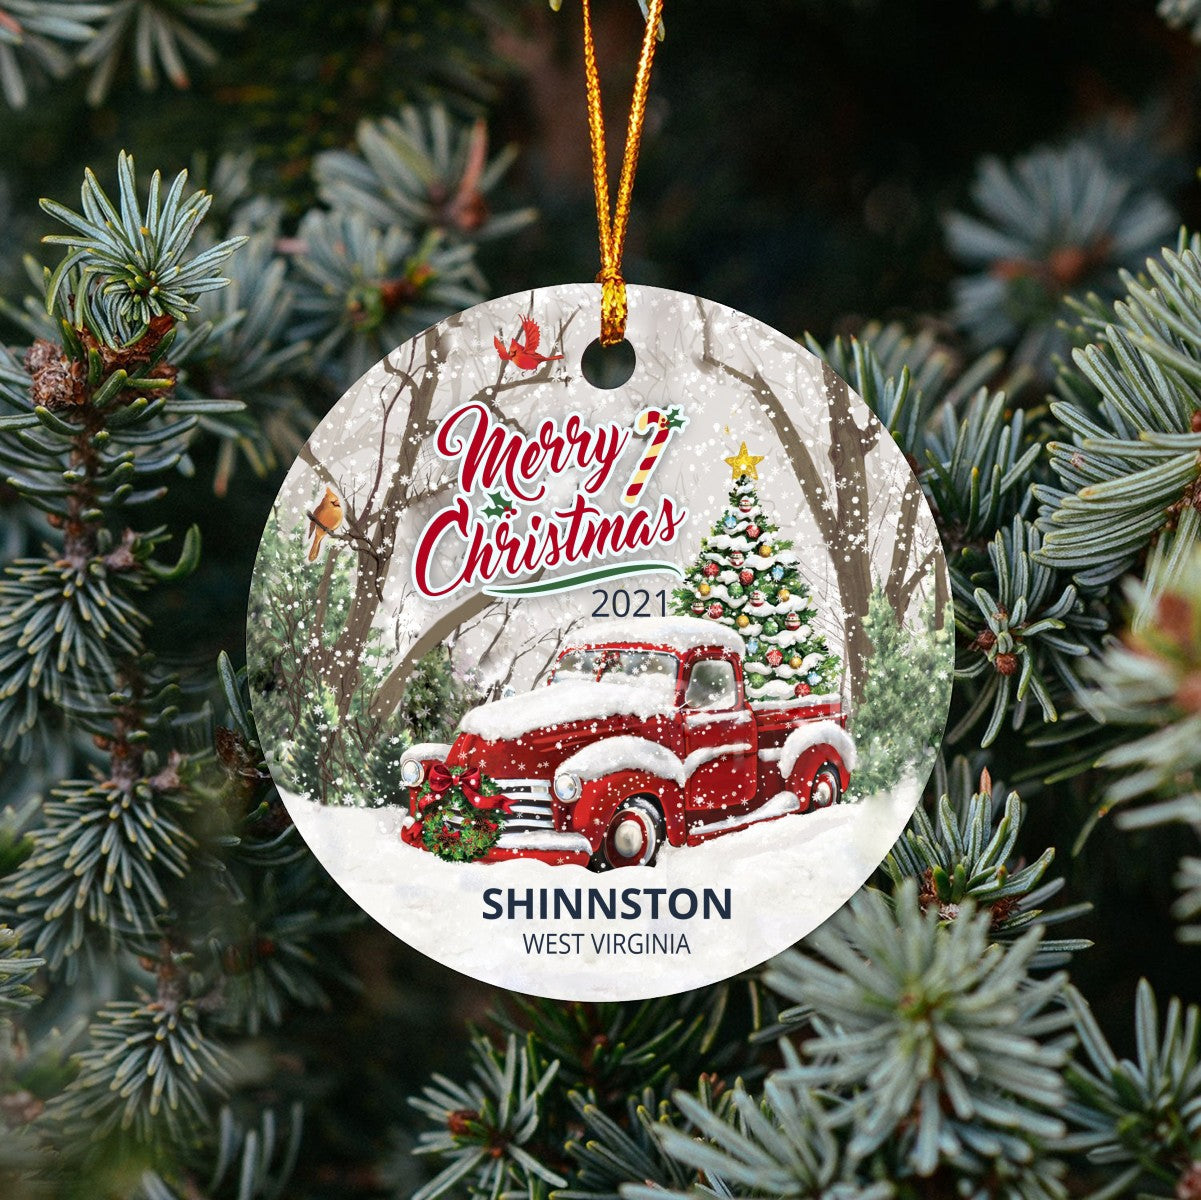 Christmas Tree Ornaments Shinnston - Ornament With Name City, State Shinnston West Virginia WV Ornament - Red Truck Xmas Ornaments 3'' Plastic Gift For Family, Friend And Housewarming